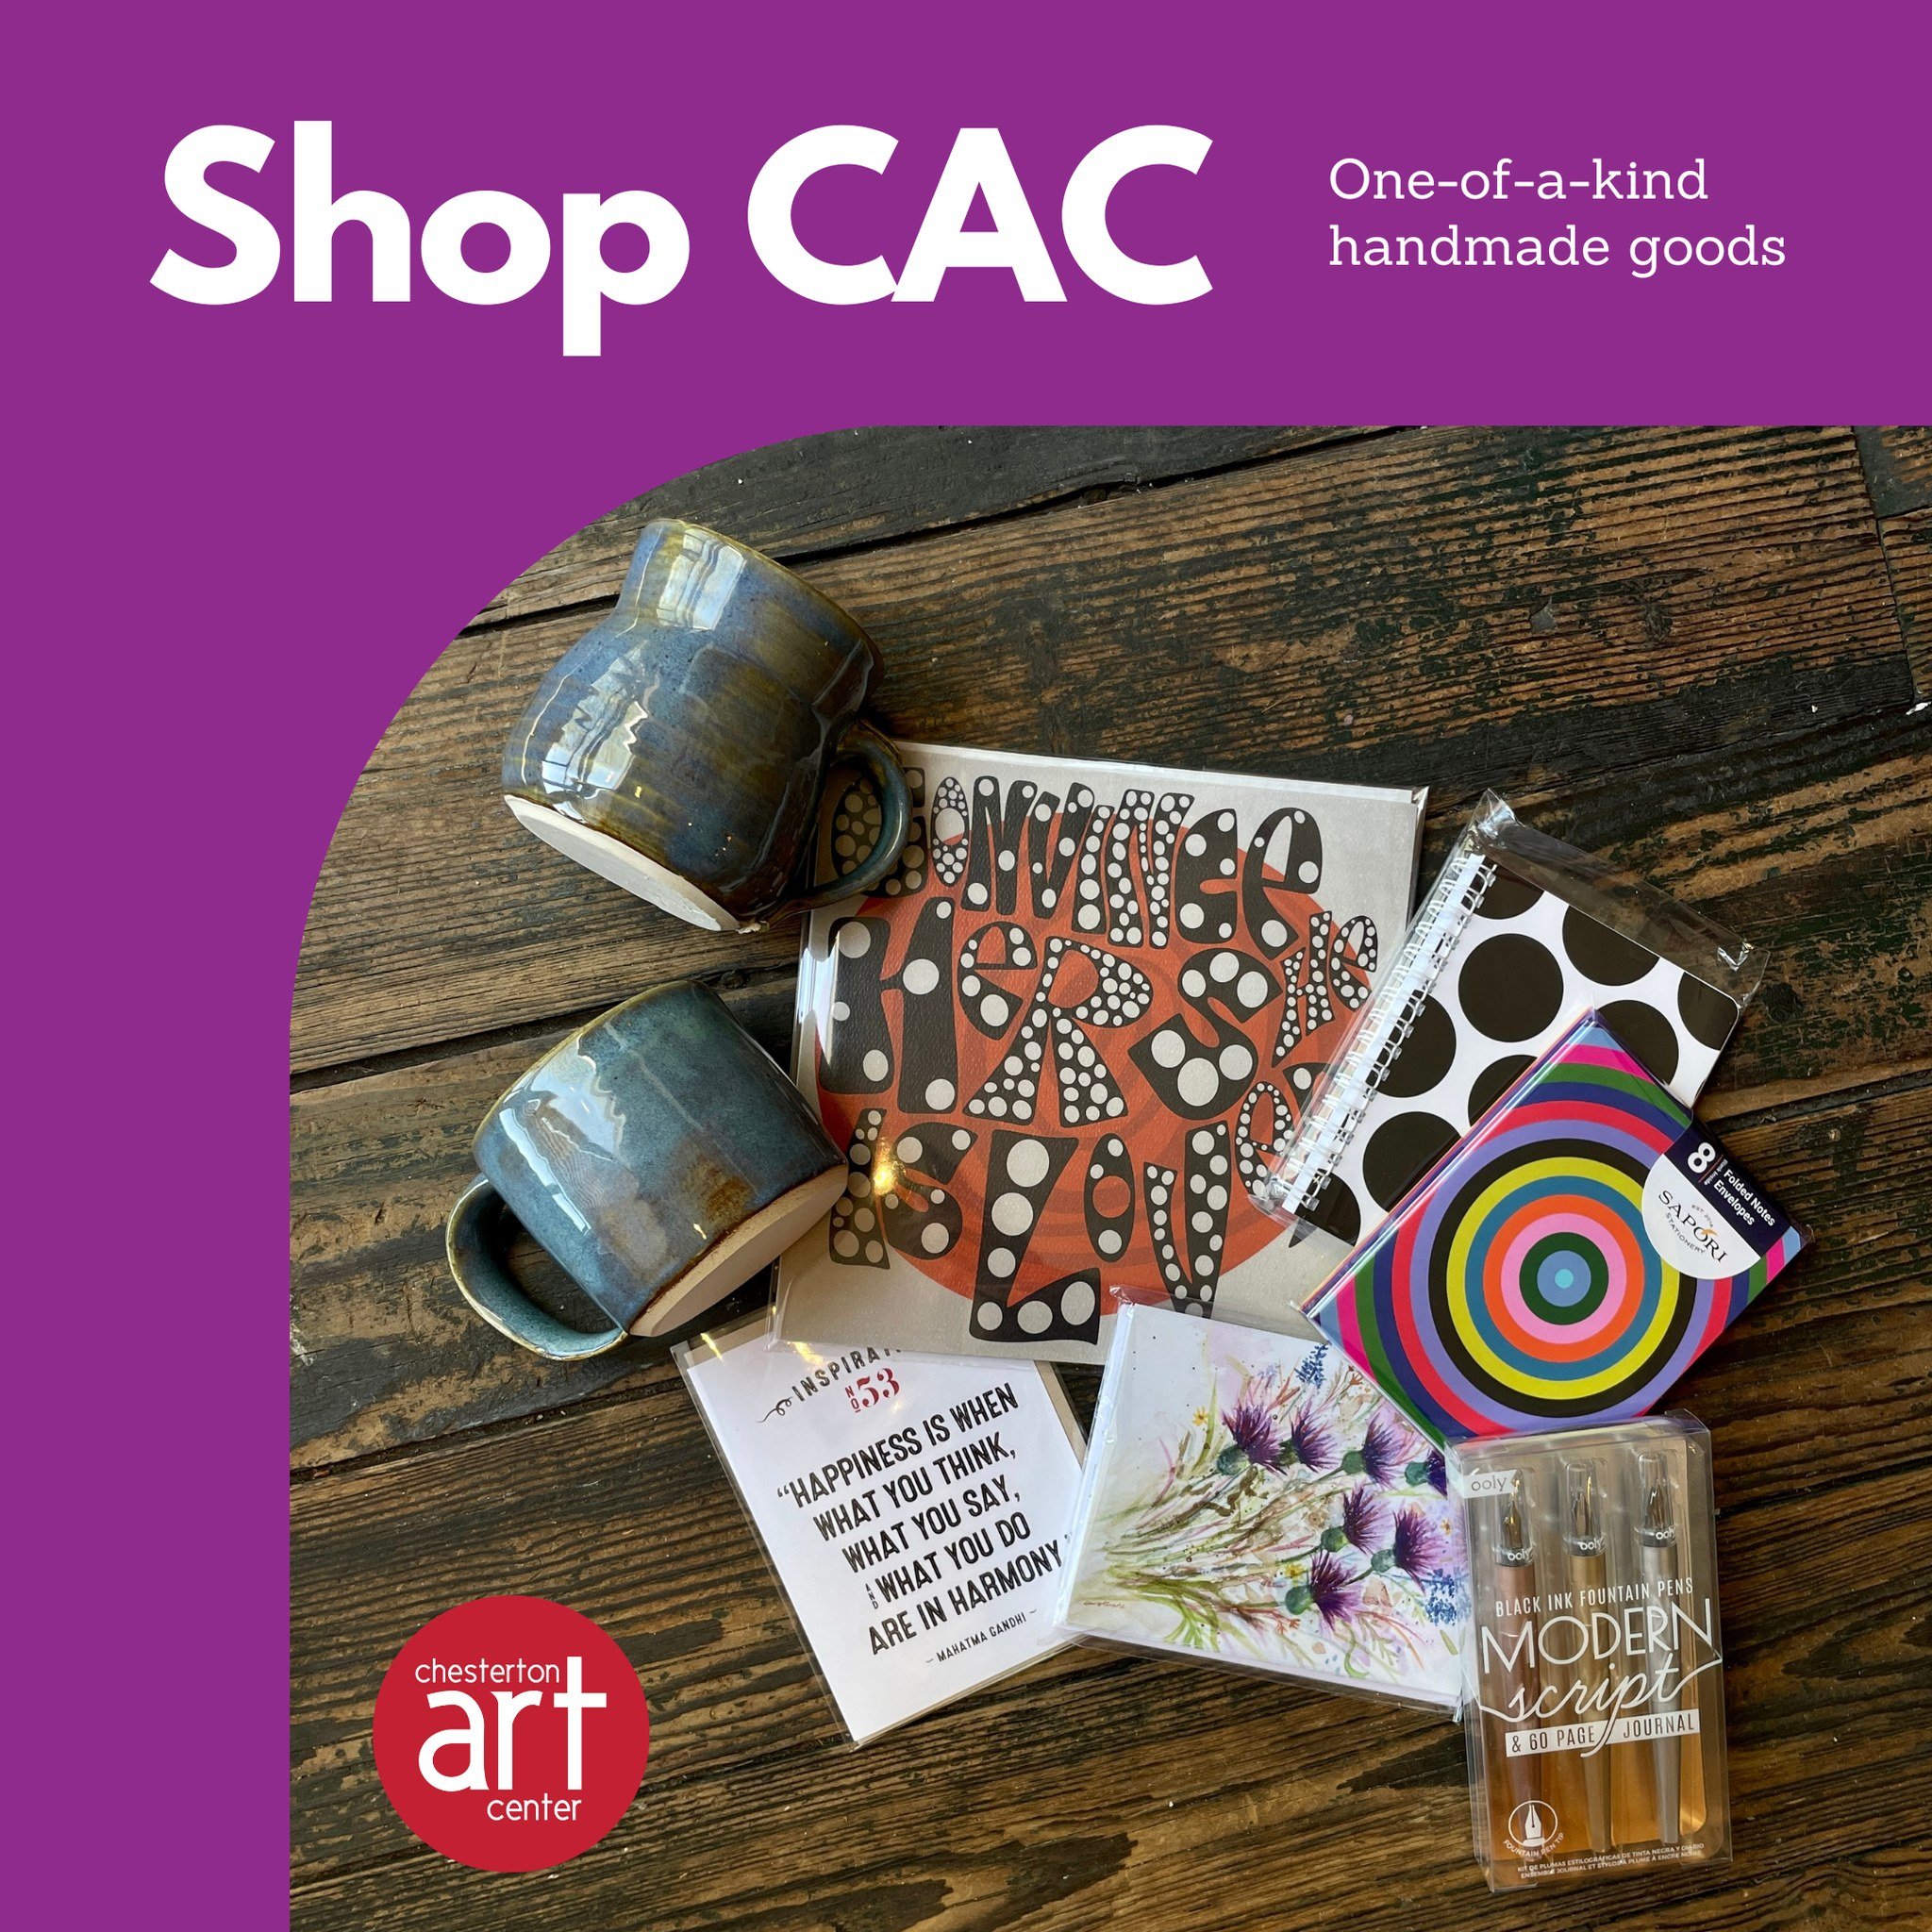 Do you know a list-making, quote-loving, coffee-drinking, card-writing Mom? Stop by our Member Gallery + Gift Shop and shop all of our wonderfully unique ceramics, stationery, prints, and much more for this Mothers Day 💜

Our Gift Shop and Member Ga